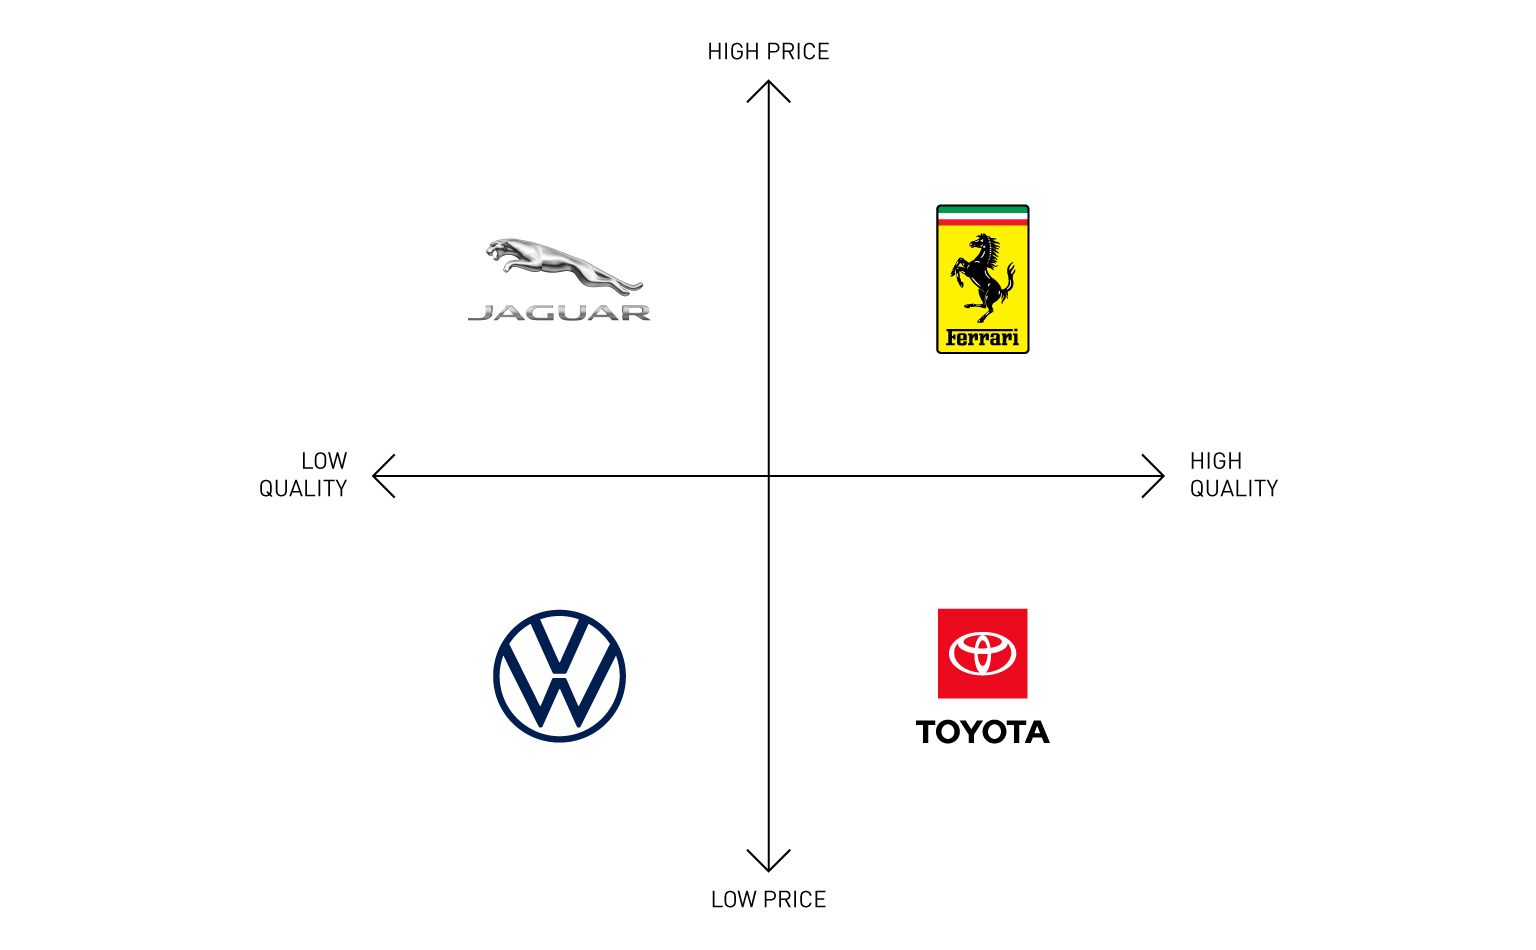 An example of a brand positioning map with 4 well-known automotive brands positioned according to price and quality